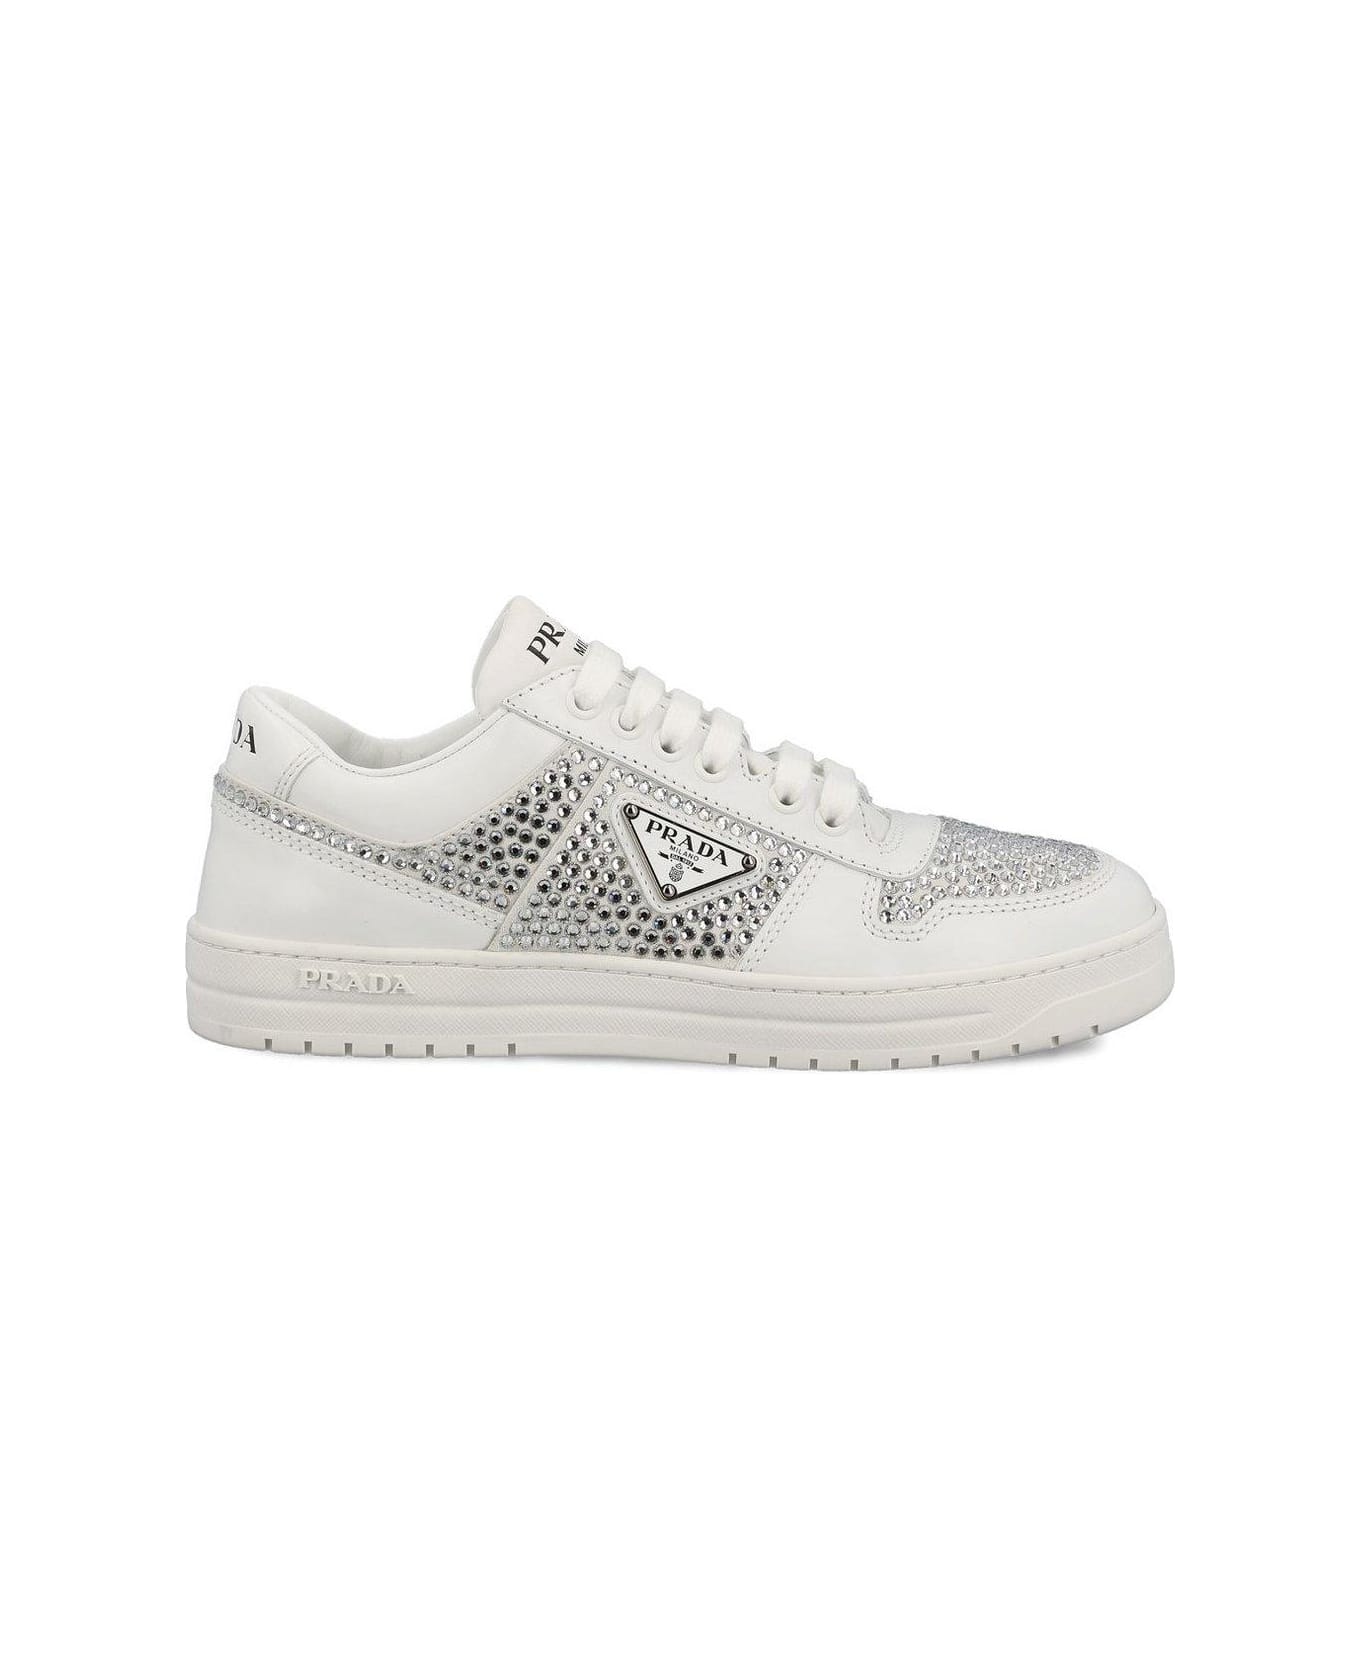 Prada Embellished Lace-up Sneakers - WHITE スニーカー